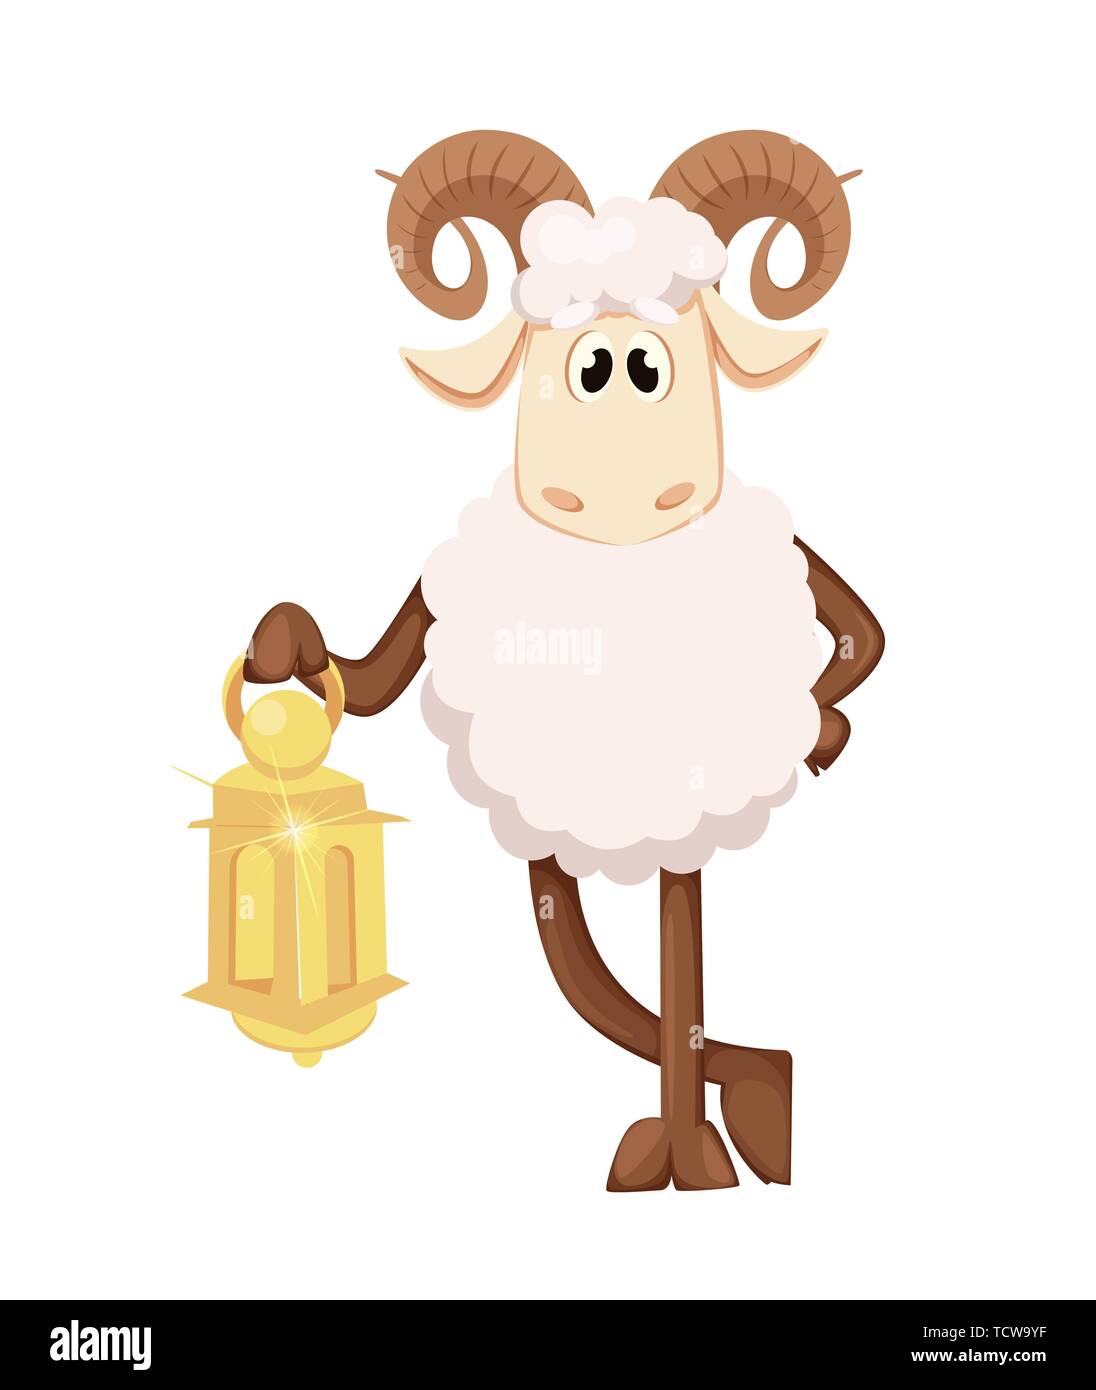 Eid al Adha Mubarak greeting card with funny ram holding lantern. Traditional Muslim holiday. Vector illustration on white background Stock Vector